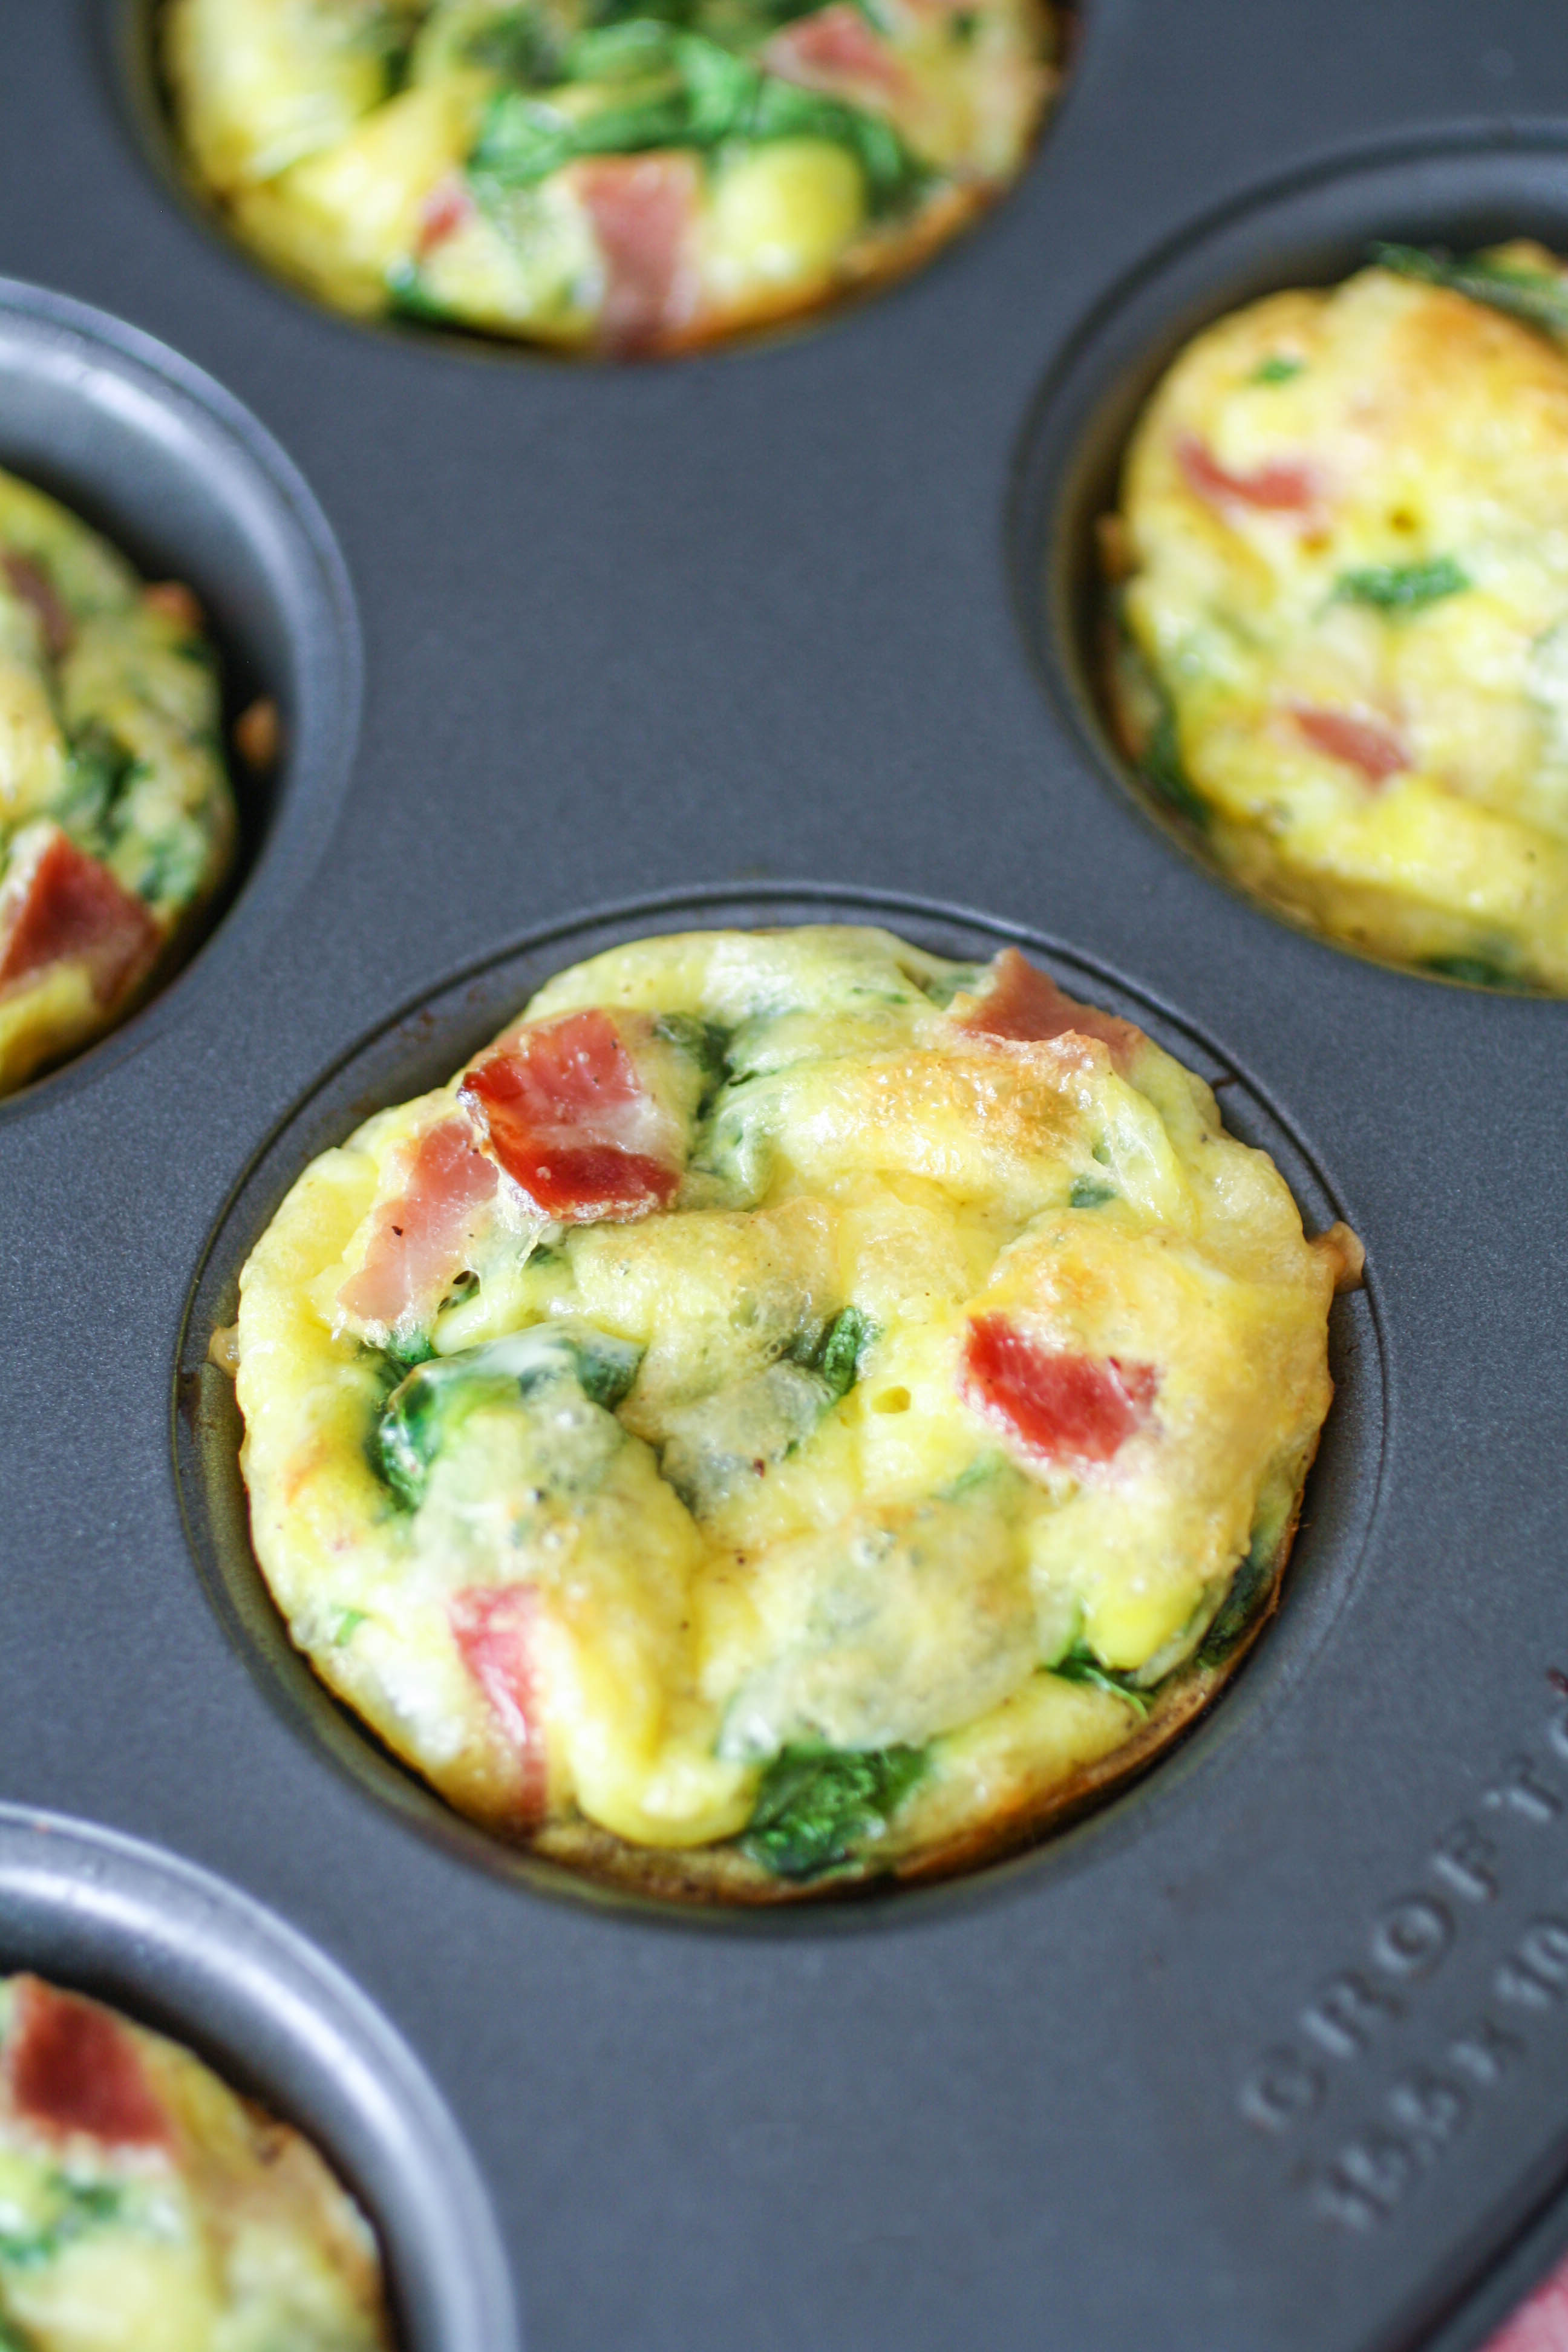 Ham, Swiss, and Spinach Egg Muffin Cups are easy to make, and easy to customize for a great breakfast! Ham, Swiss, and Spinach Egg Muffin Cups are a delight for any meal!